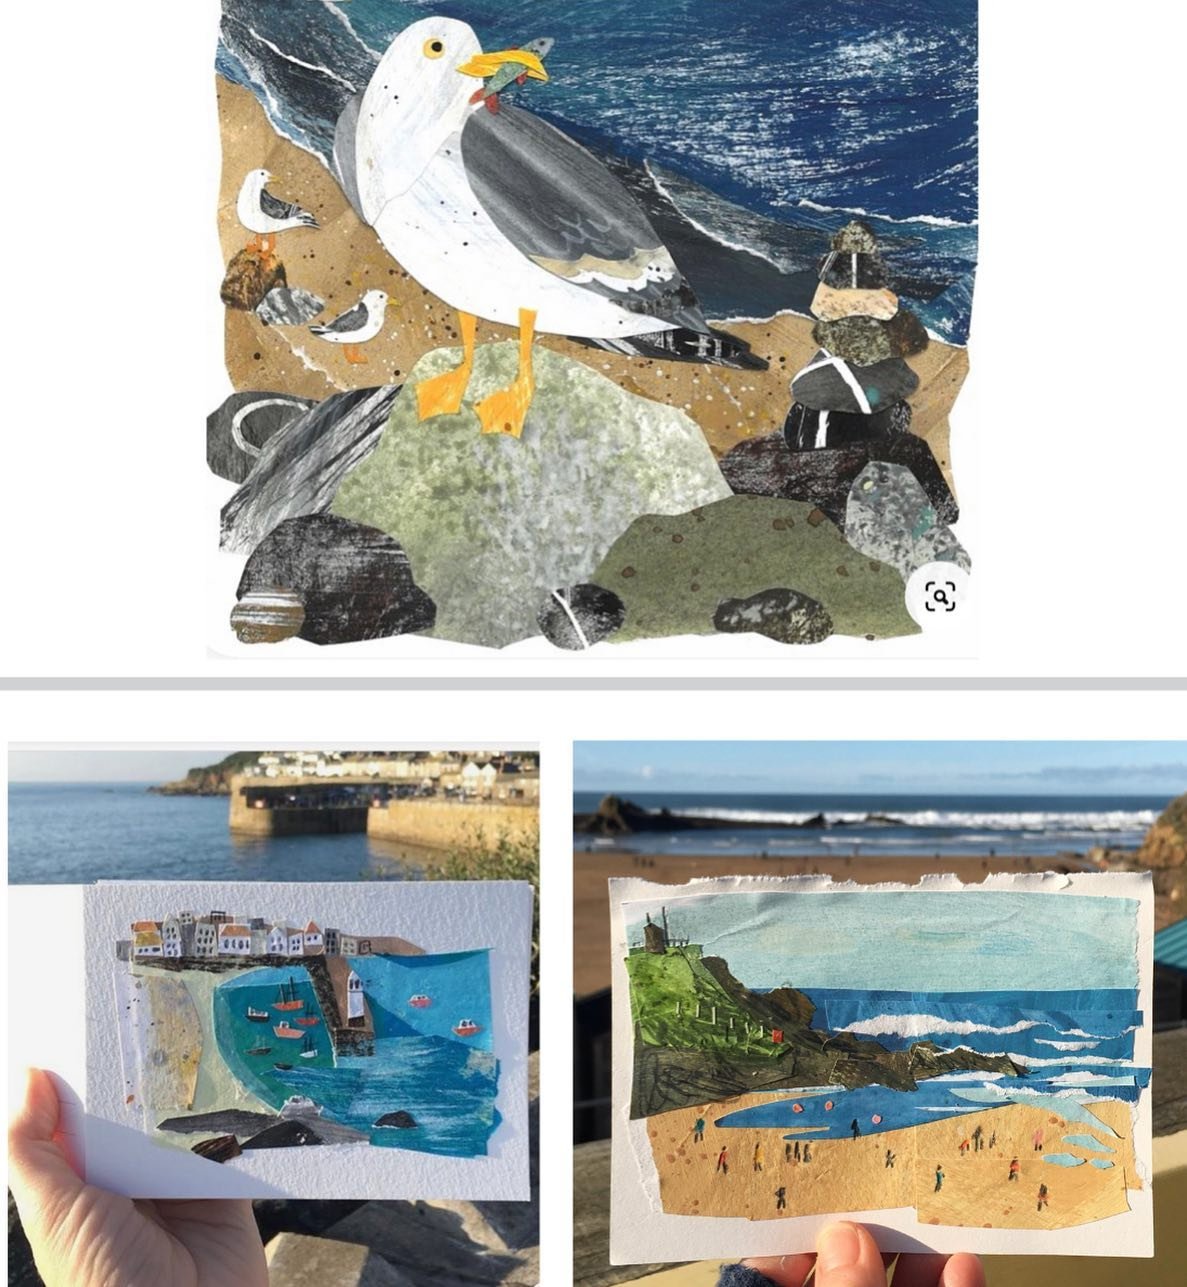 Our Artist in Focus is Clover Robin @clover_robin She makes detailed textured collages. Her work is used in many beautiful book publications and she sells her work online and in galleries and gift shops.